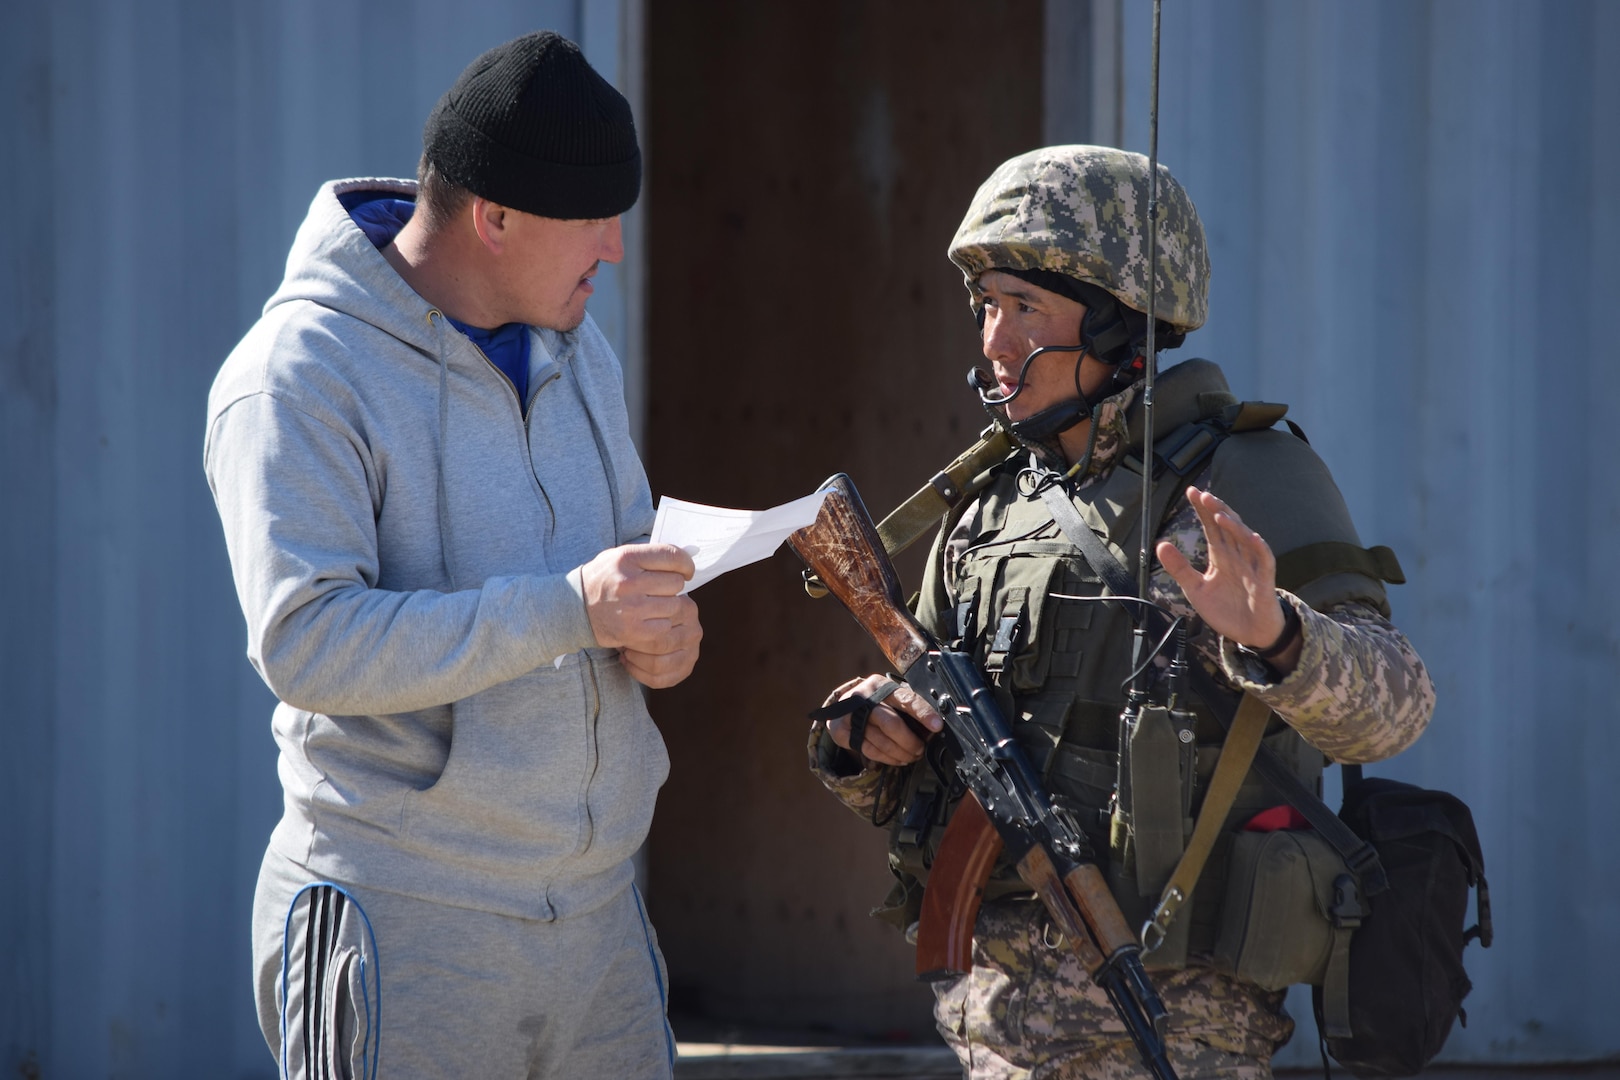 A Kazakhstani soldier practices civil military operations with a citizen role player during a Steppe Eagle Koktem scenario Apr. 10, 2017, at Illisky Training Center, Kazakhstan. Civil Military operations are critical tasks in peacekeeping operations.